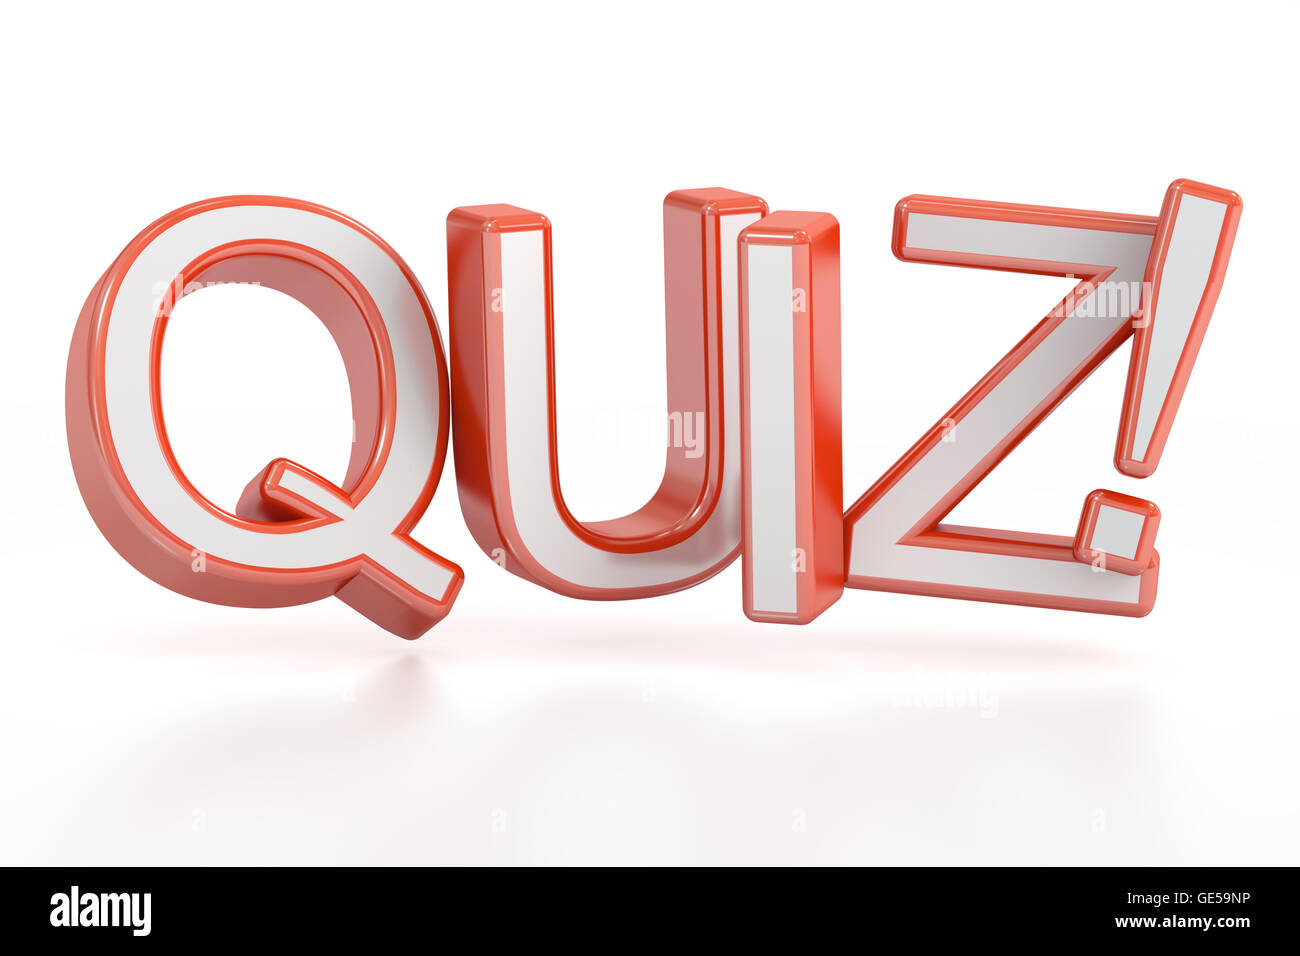 Quiz! 3D rendering isolated on white background Stock Photo